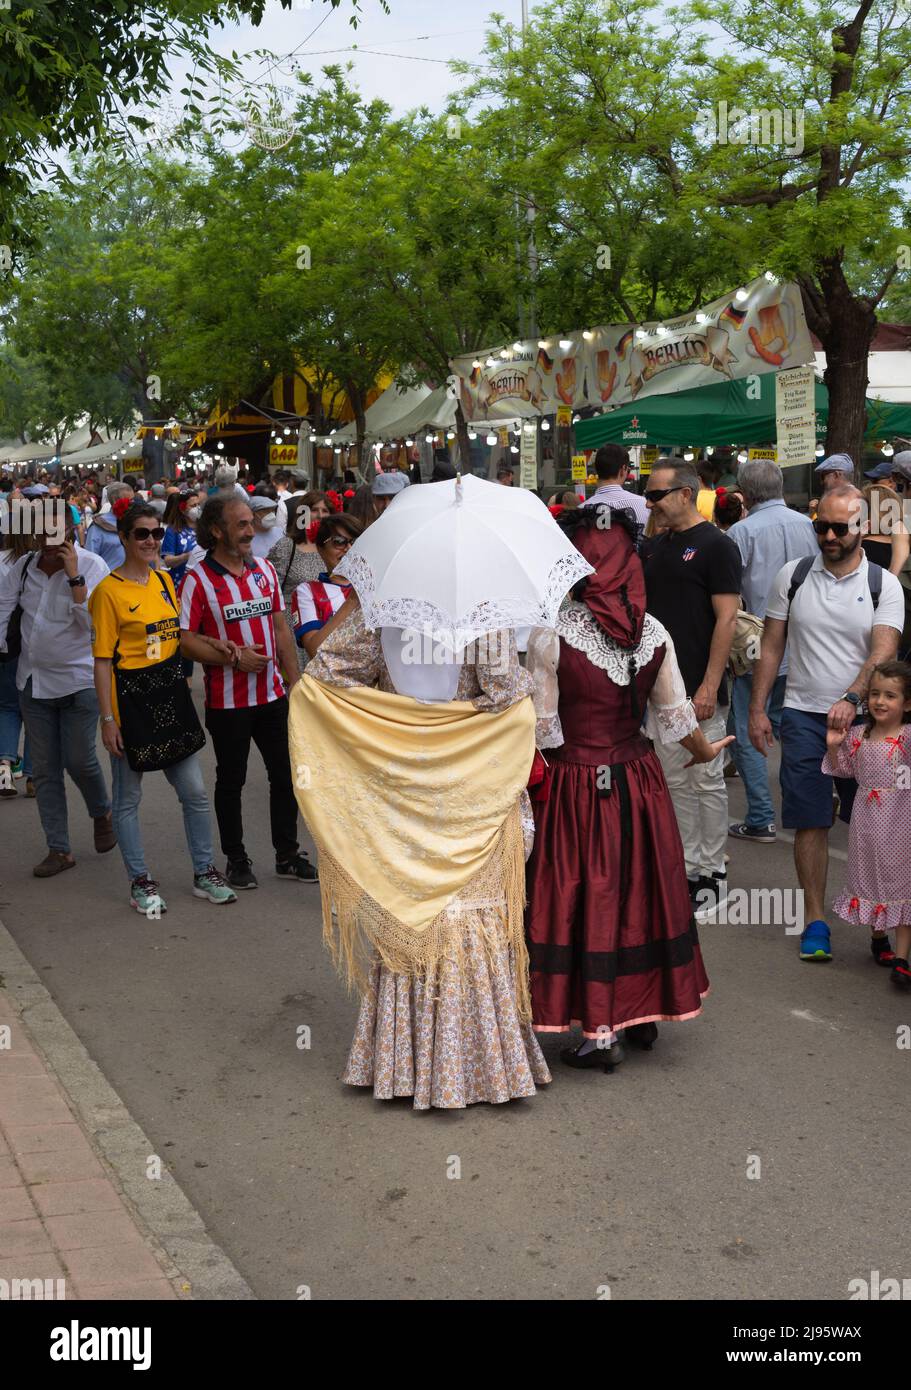 Madrid, Spain; 15th May 2022: A group of people visiting the stalls at the Saint Isidro fair. 2 women with their backs turned dressed in traditional M Stock Photo